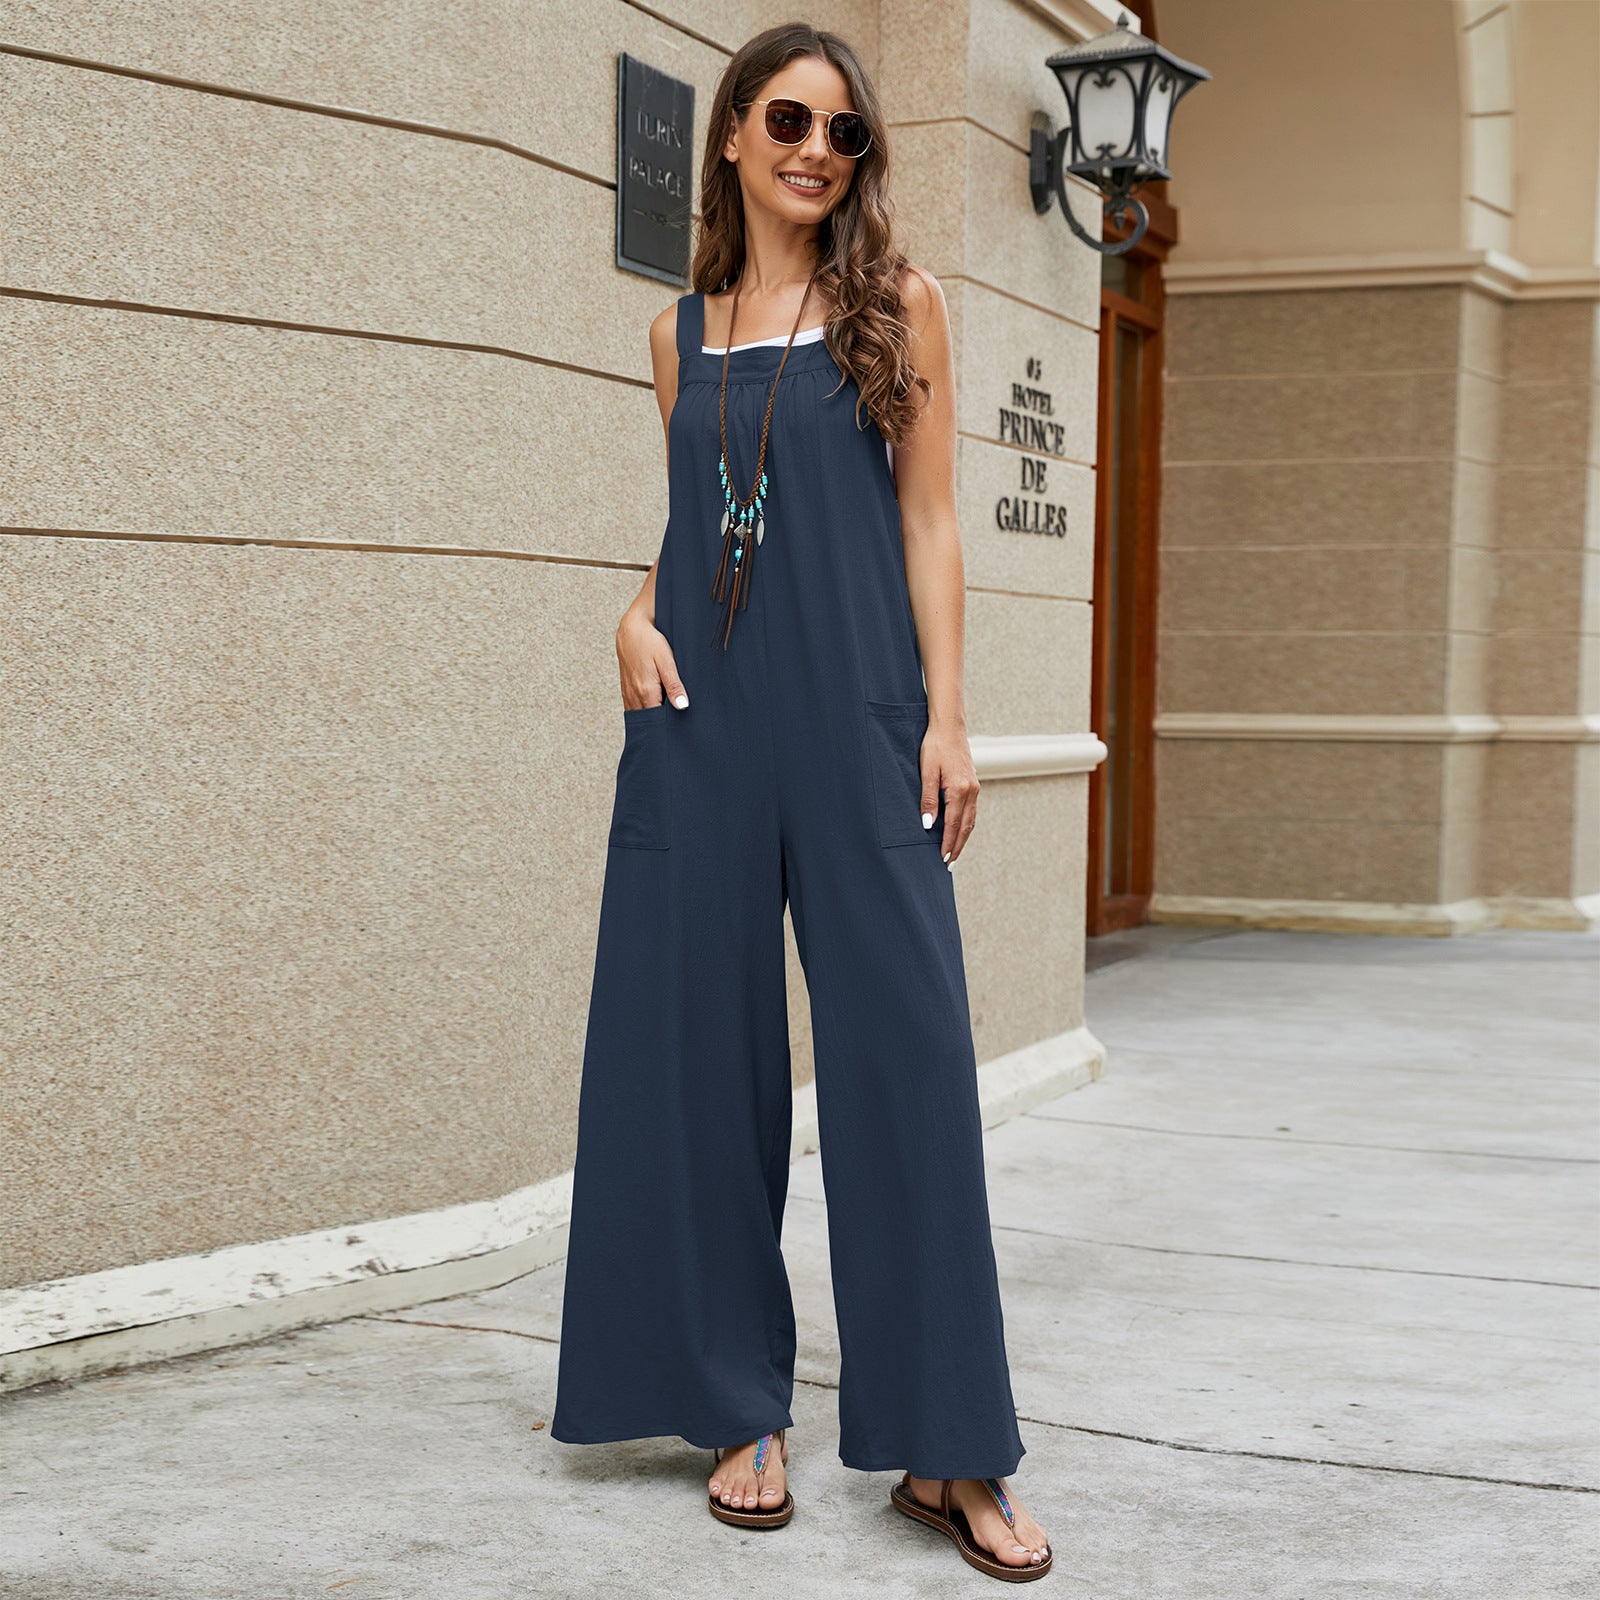 Women's Romper Jumpsuit With Pockets Personality Casual Long Suspenders